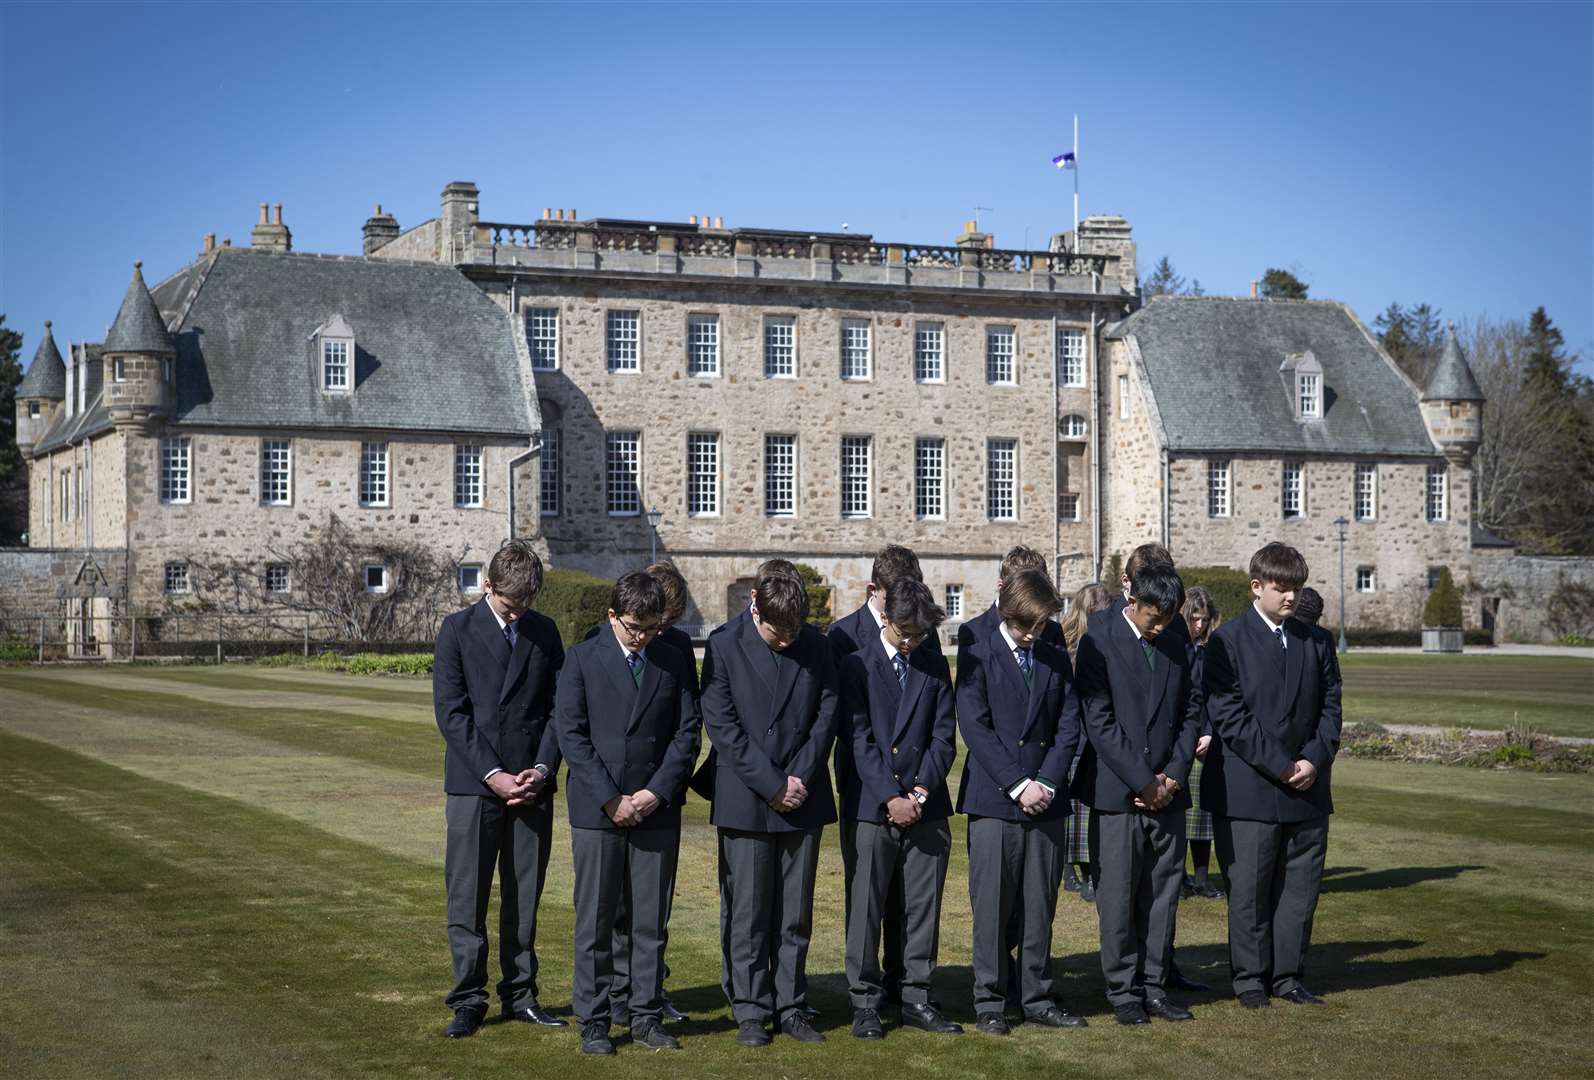 Pupils at the Duke of Edinburgh’s former school, Gordonstoun in Moray, observe the one-minute silence on the day of his funeral (Jane Barlow/PA)